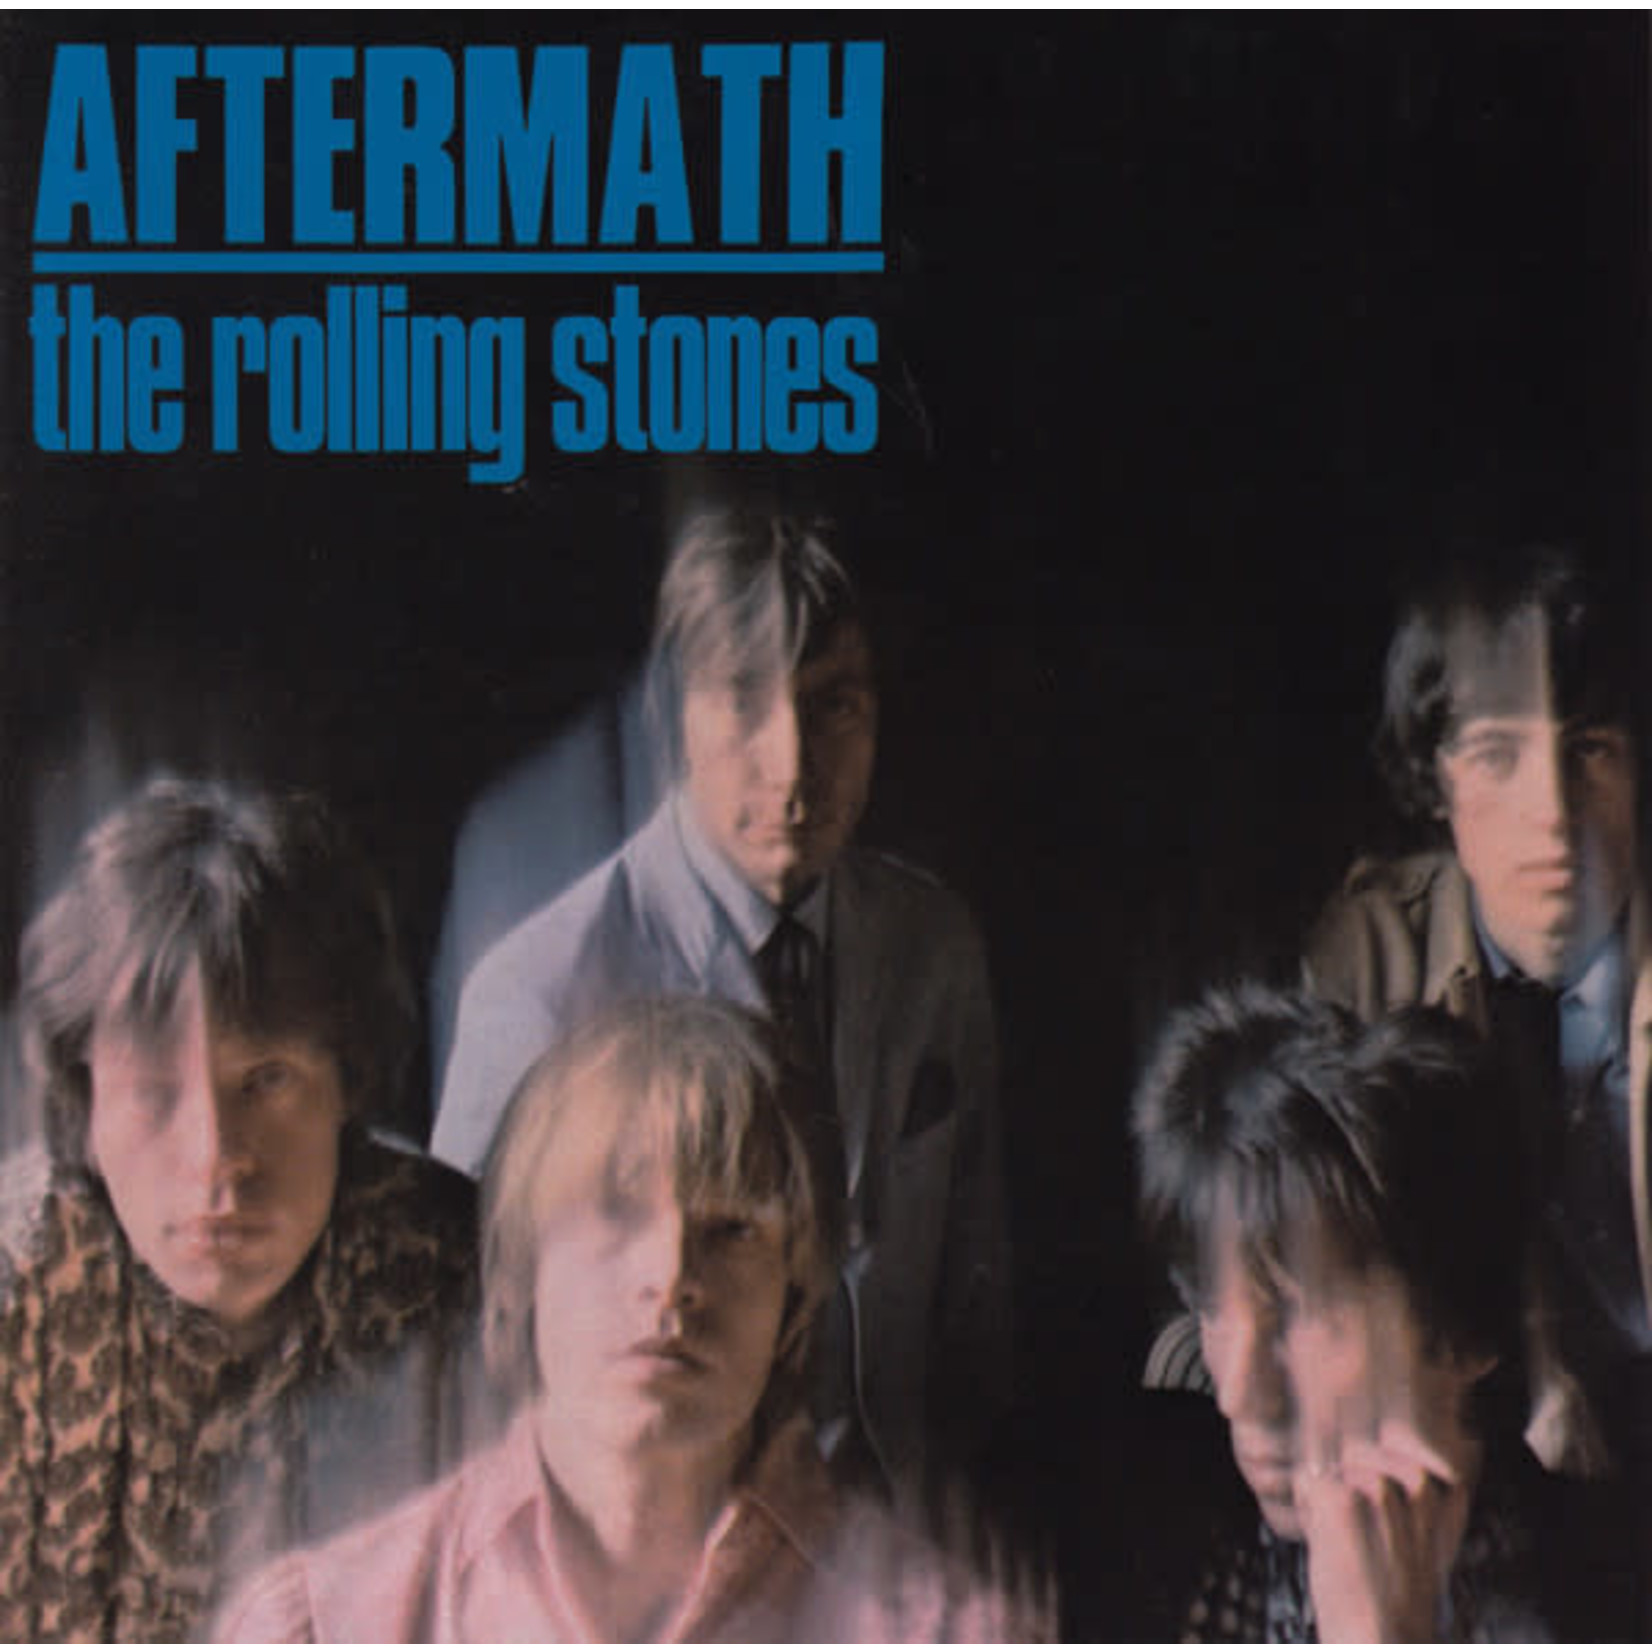 [Vintage] Rolling Stones - Aftermath (reissue)